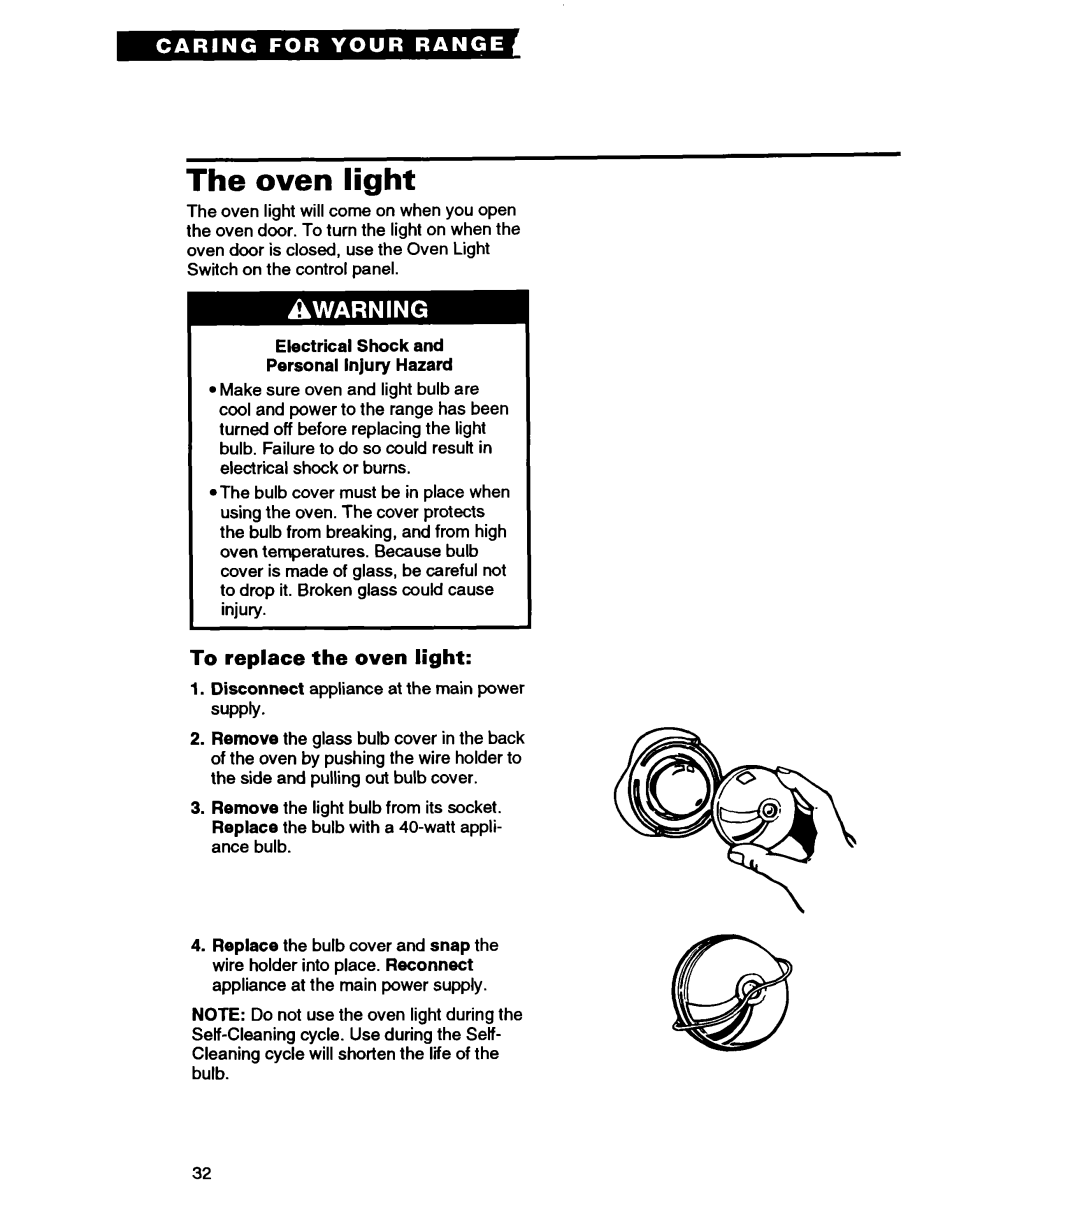 Whirlpool RS363PXY manual The oven light, To replace the oven light, Electrical Shock and Personal Injury Hazard 